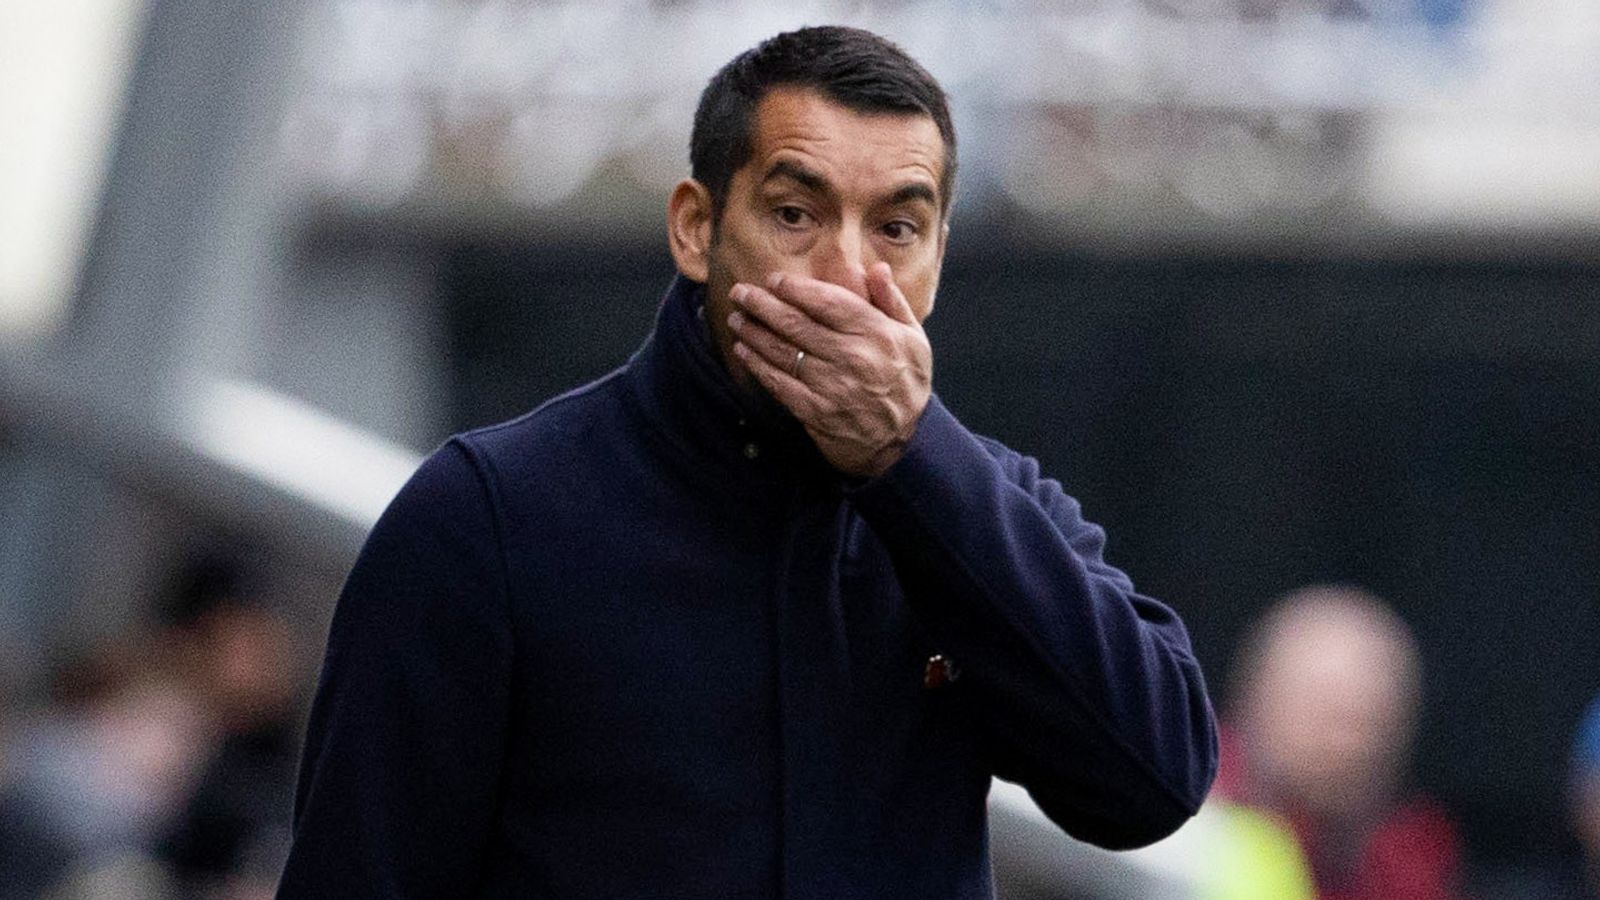 Giovanni van Bronckhorst: Sacked Rangers manager reveals he faced 'unique challenges and some very difficult circumstances to operate in'